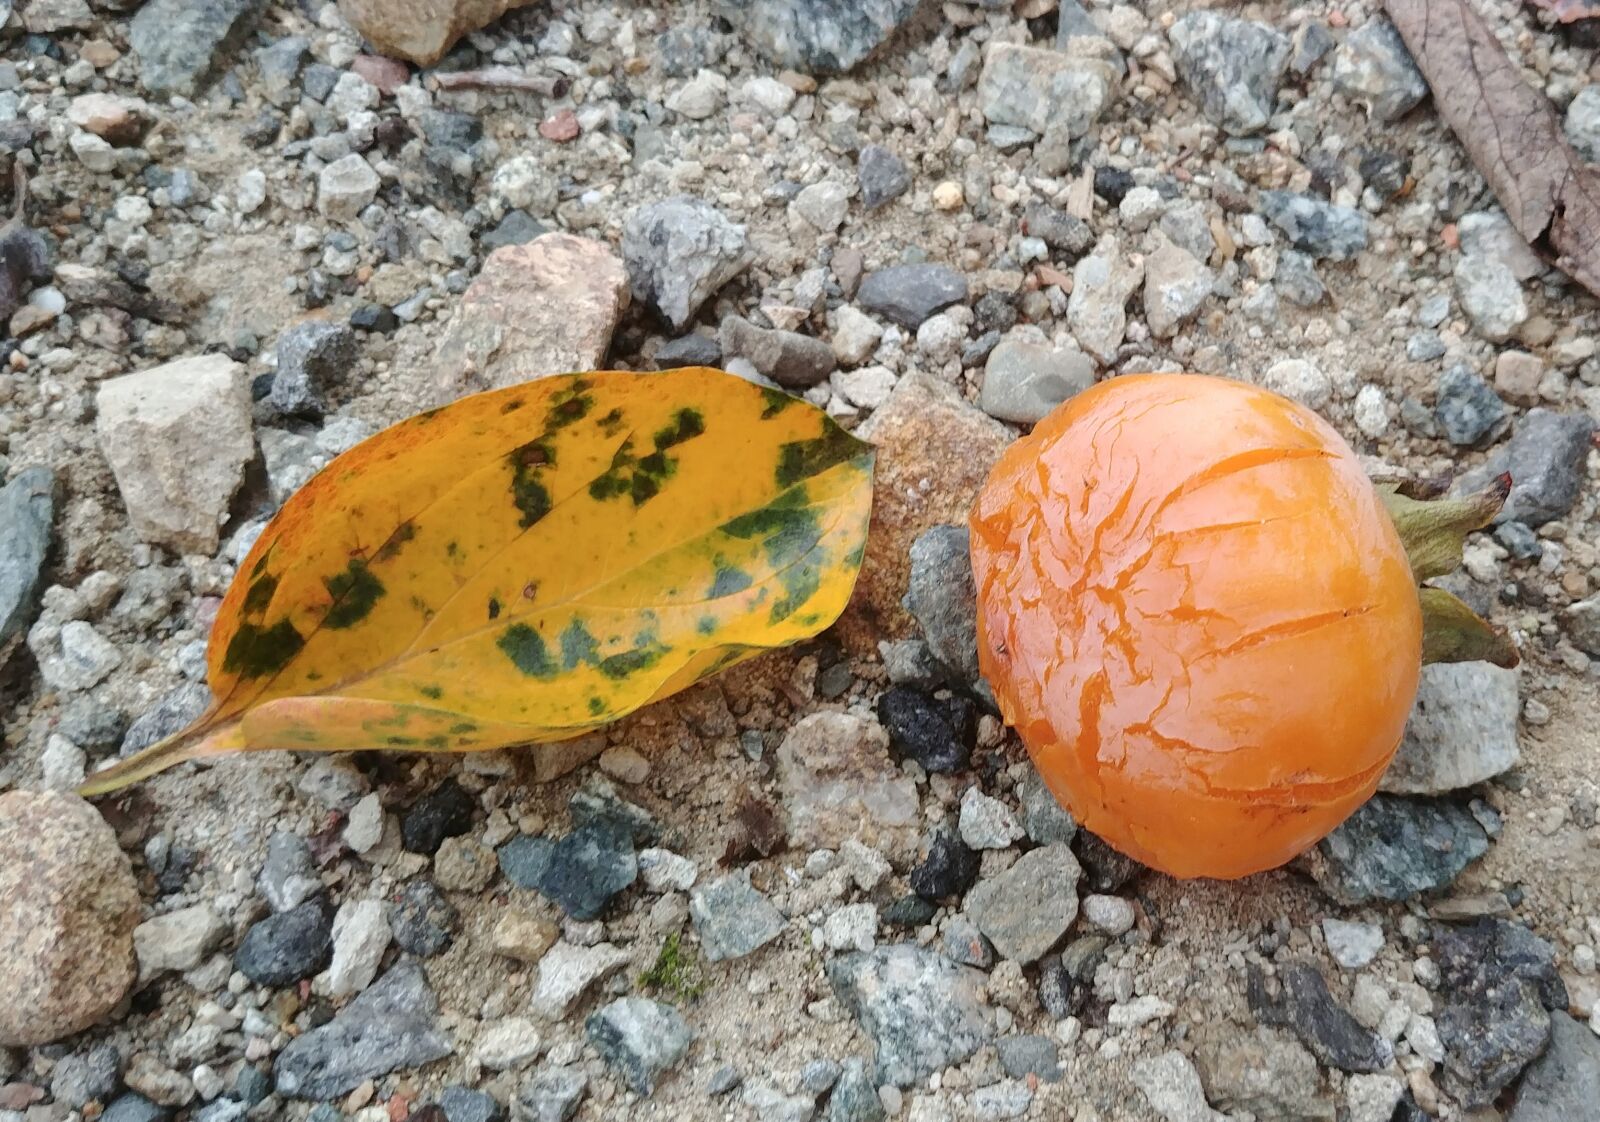 LG G6 sample photo. Persimmon, persimmon leaf, fallen photography